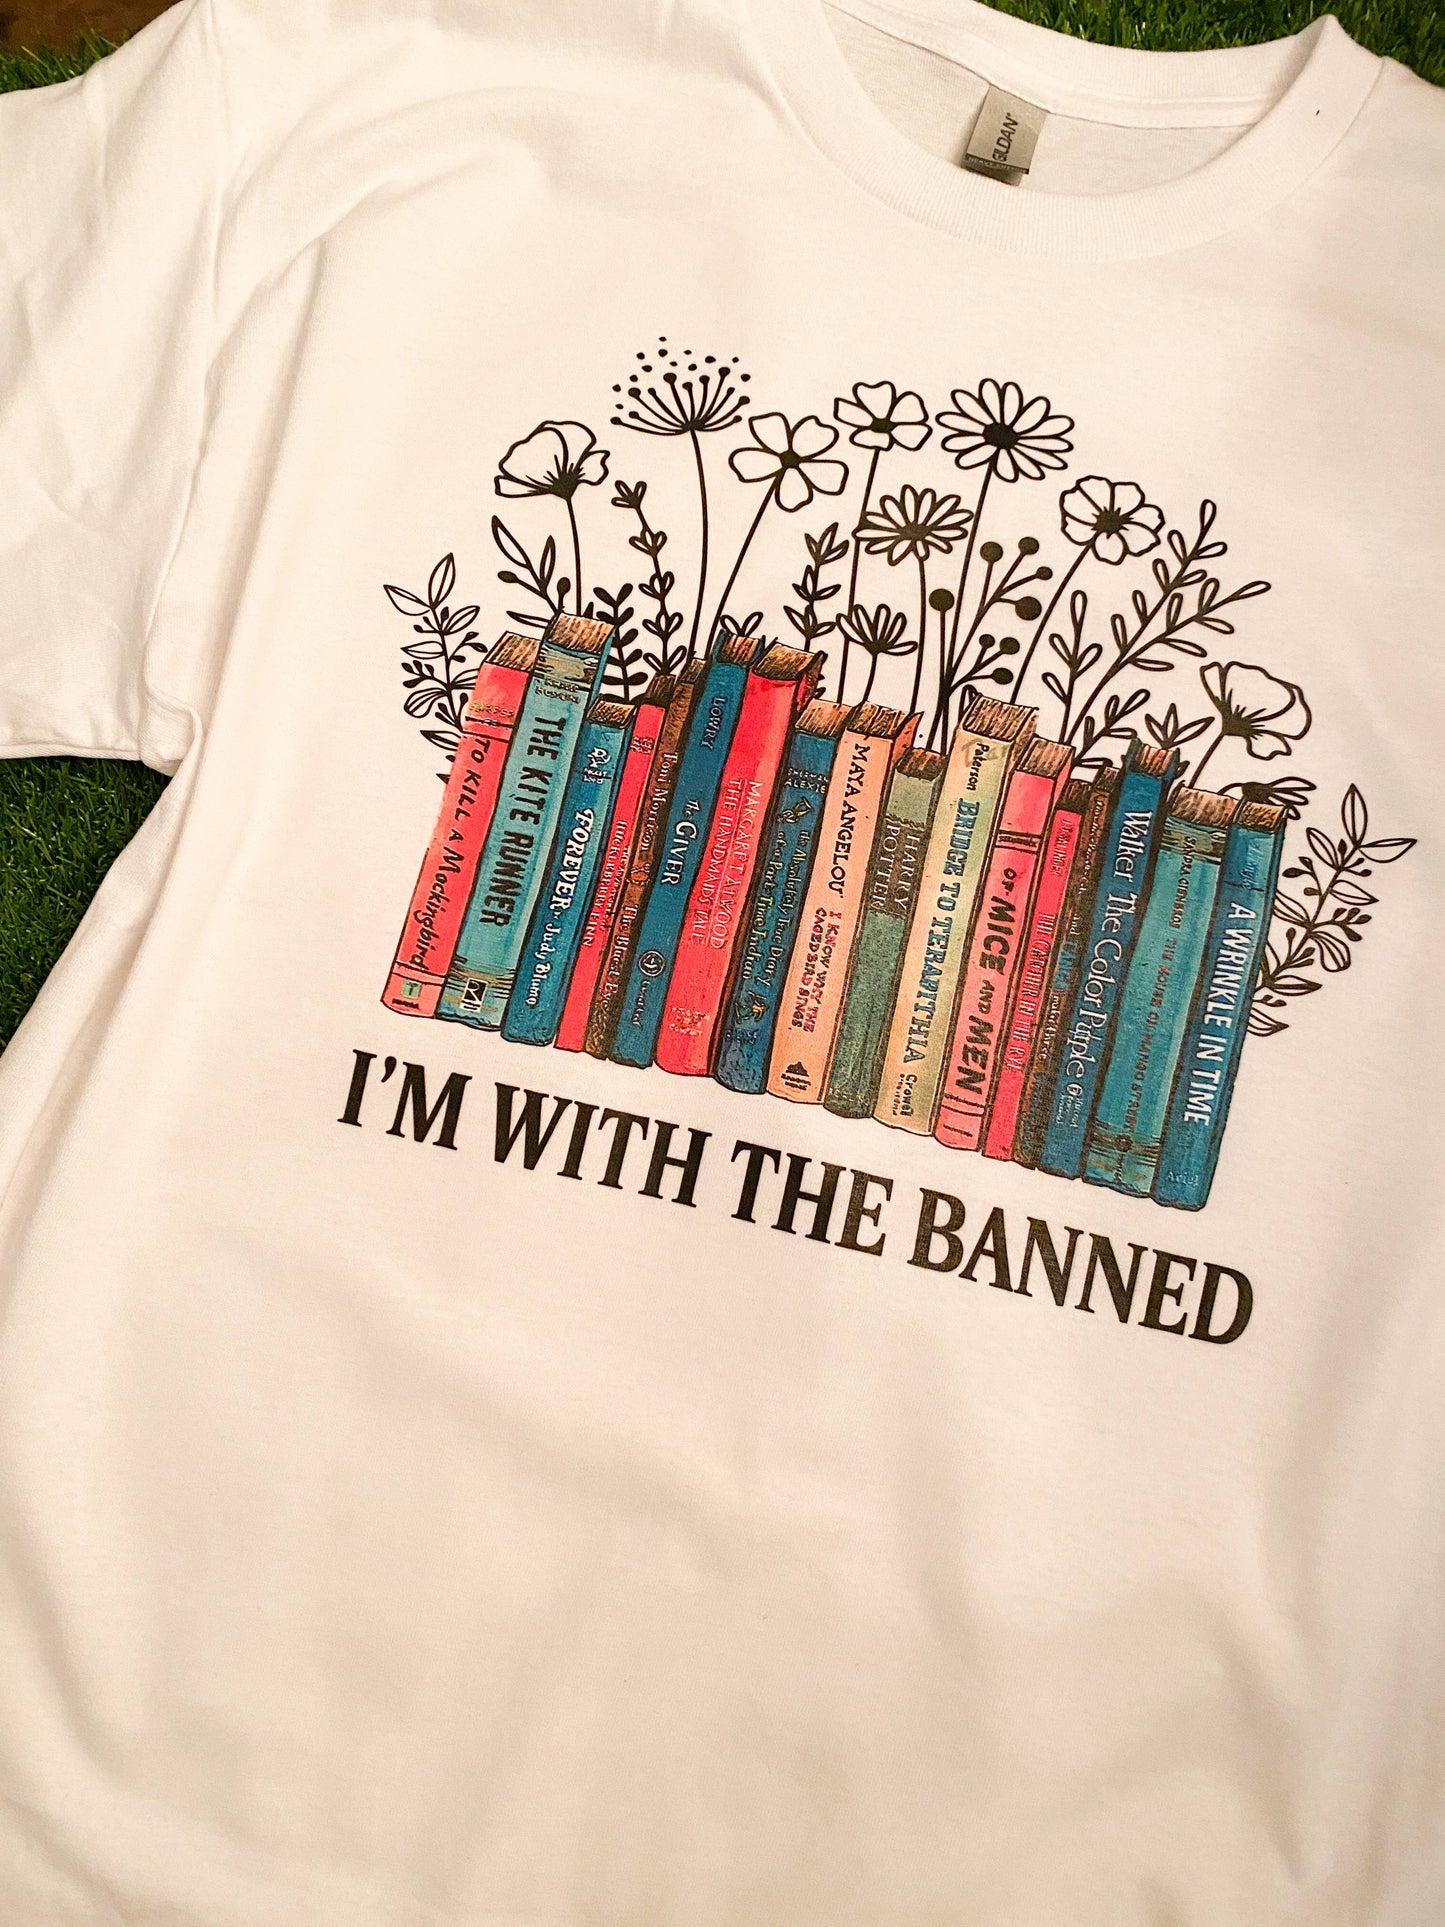 I'm with the BANNED graphic tee - 3XL